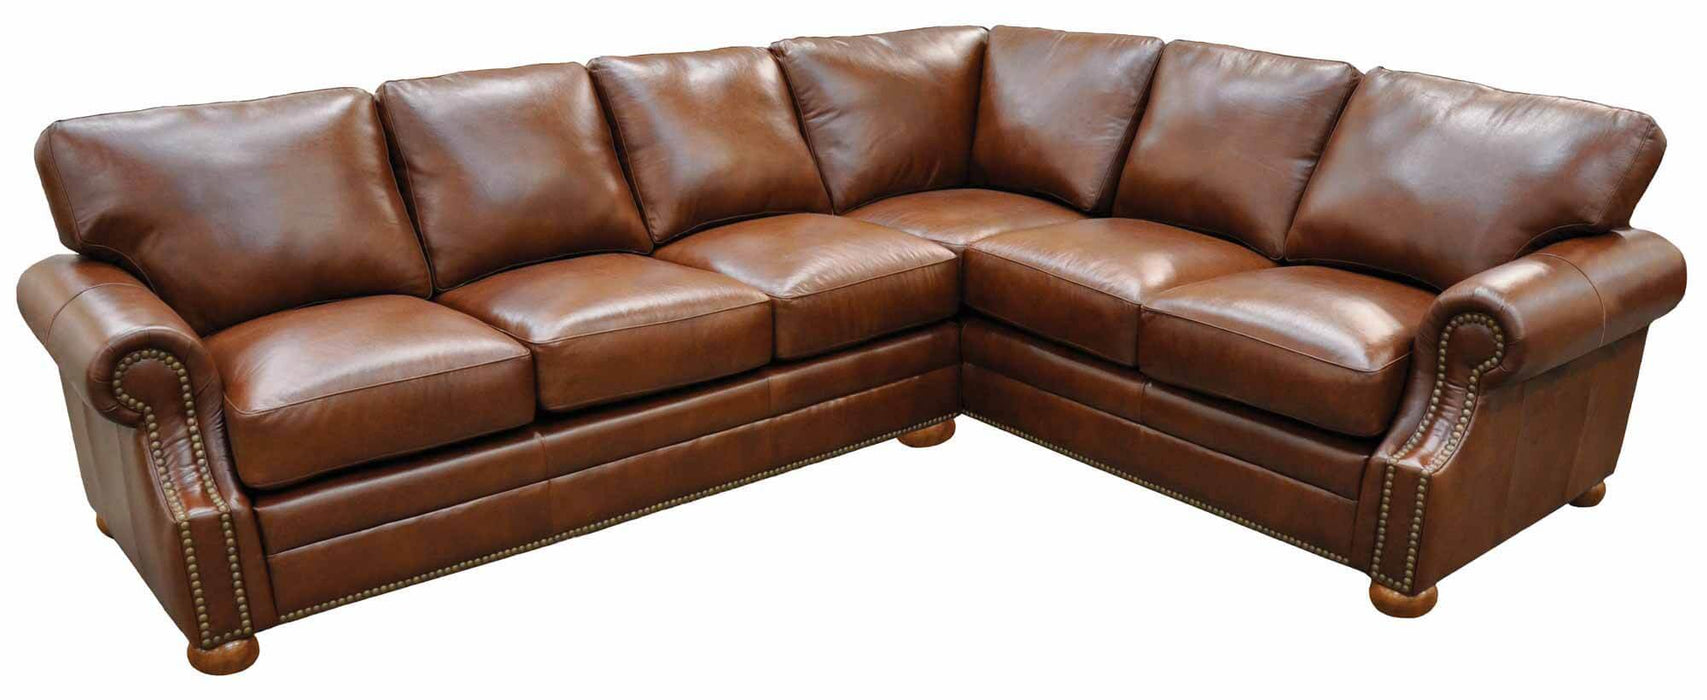 Bennett Leather Sectional | American Style | Wellington's Fine Leather Furniture